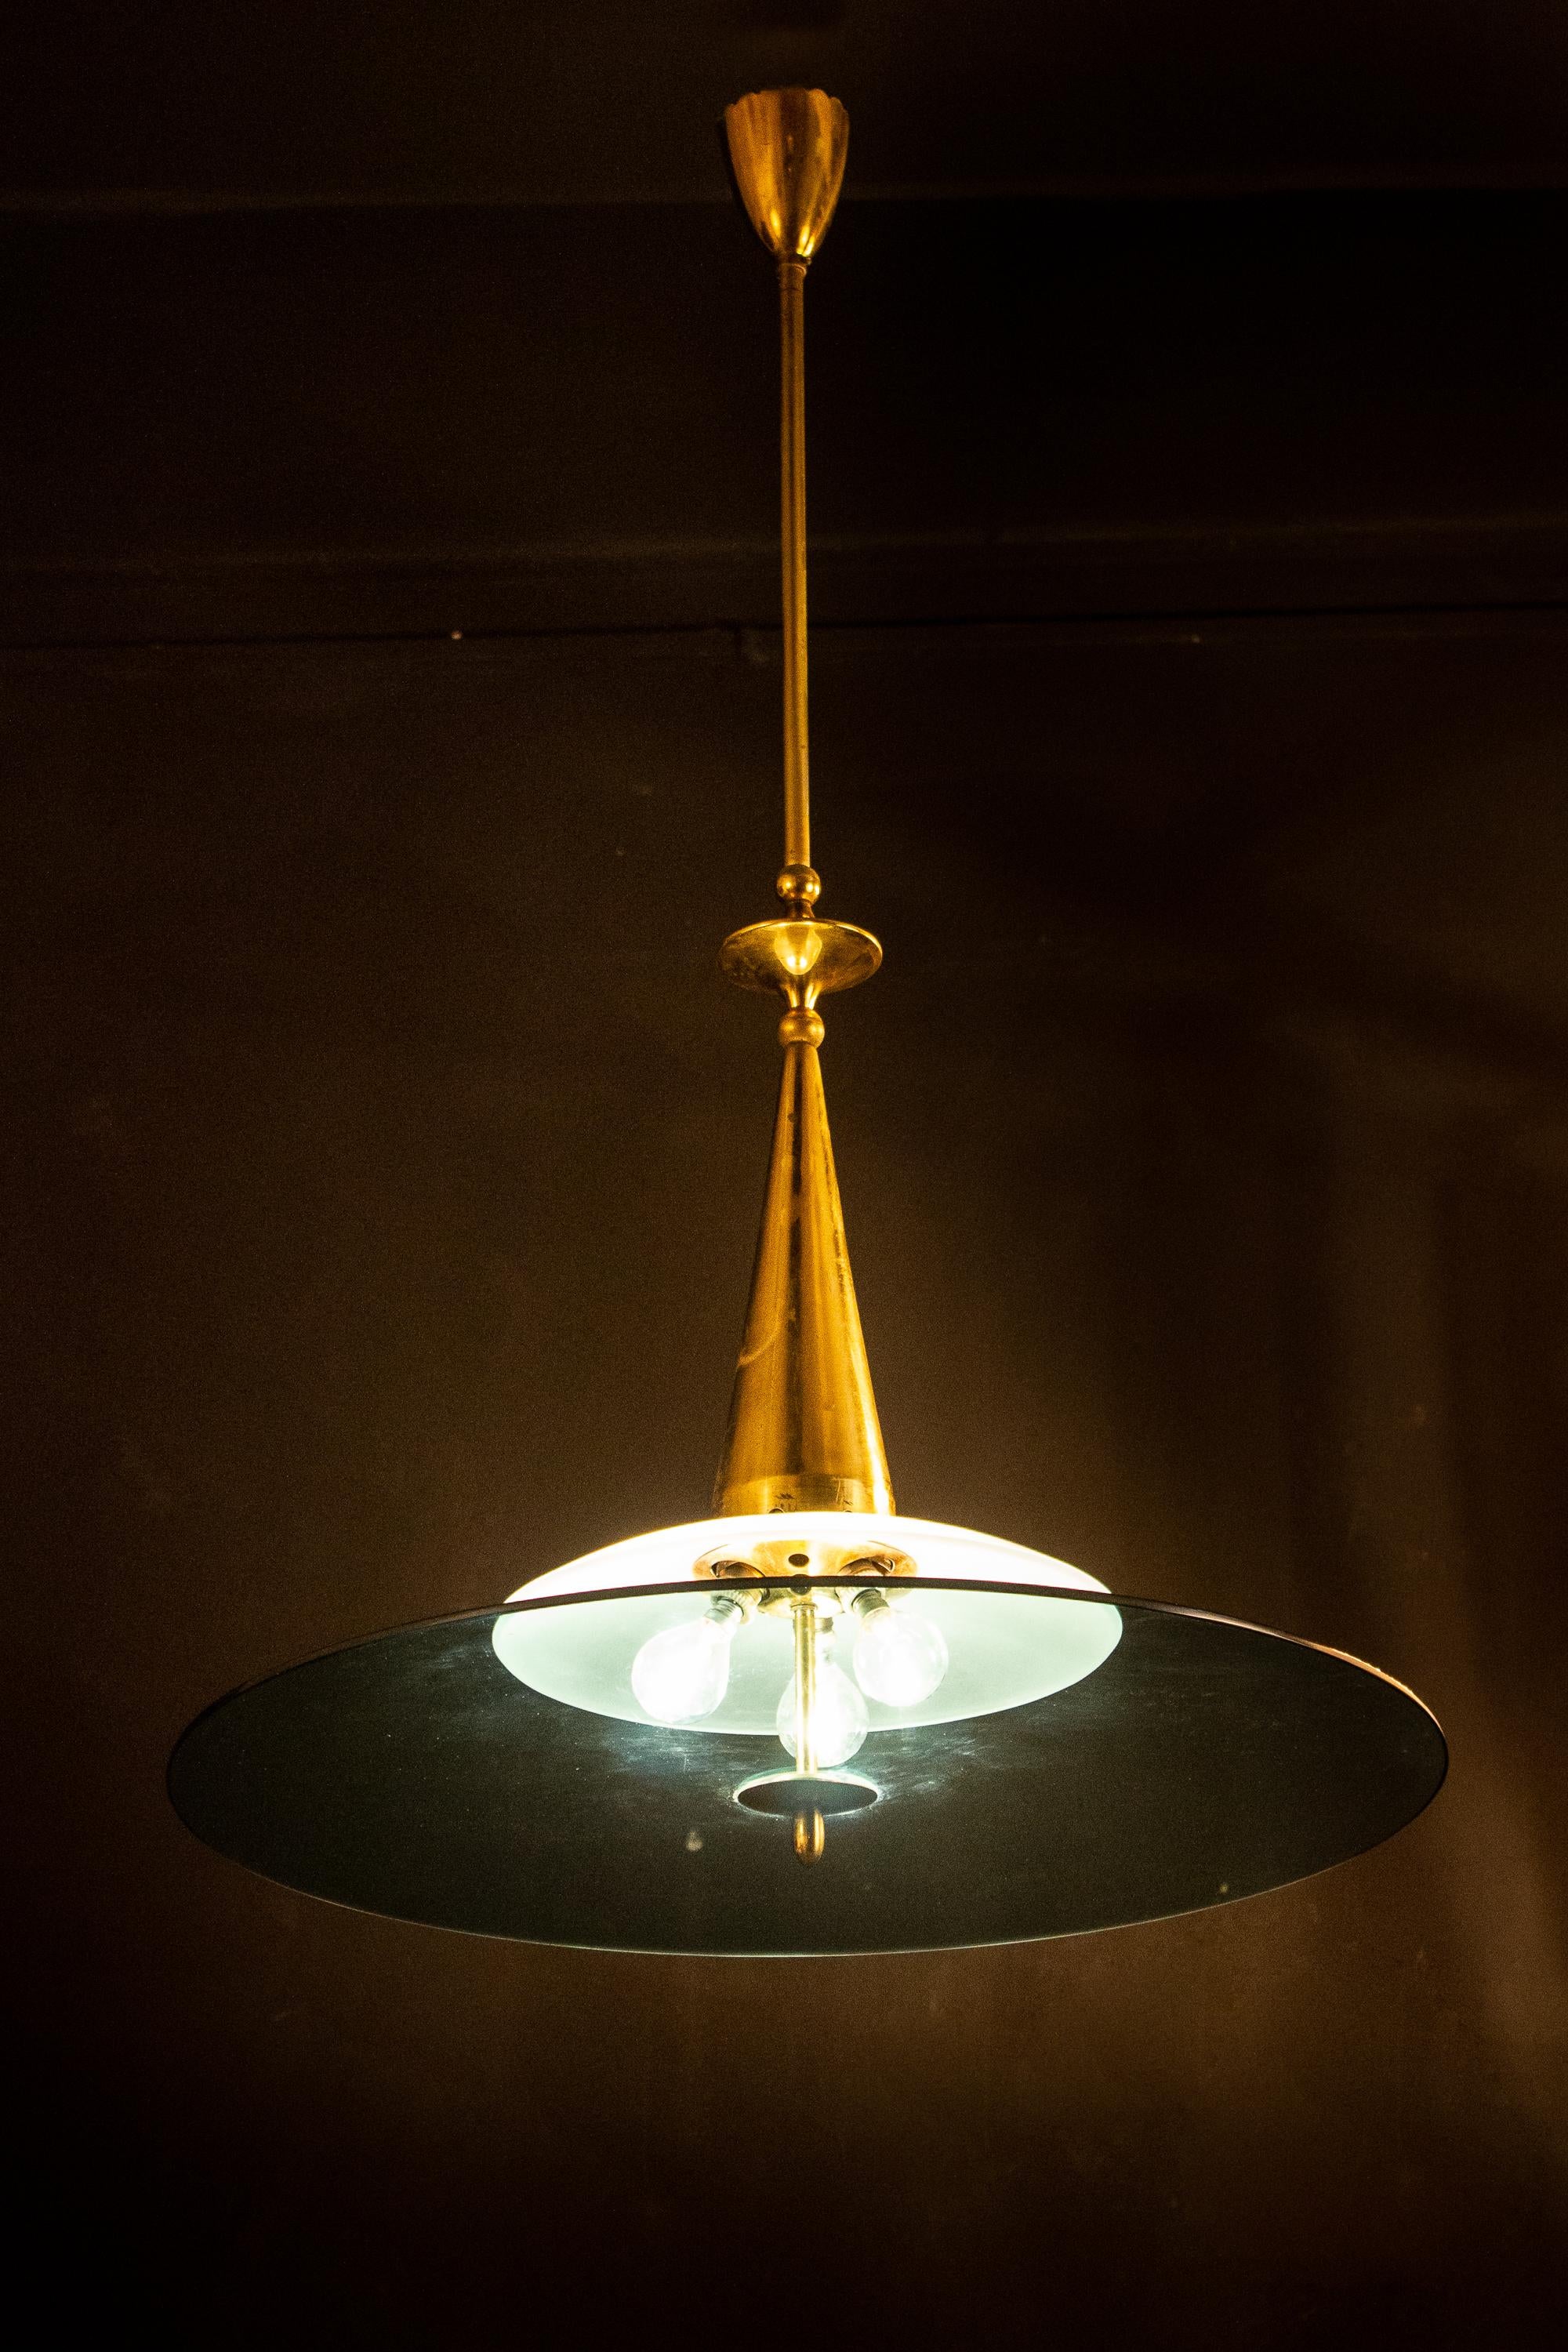 Elegant Minimalist chandelier attributed to Max Ingrand for Fontana Arte, with a frosted glass bowl and a large blue crystal shade supported by sophisticated polished brass hardware.
The glasses are in perfect condition.
Three E 14 lightbulbs. We